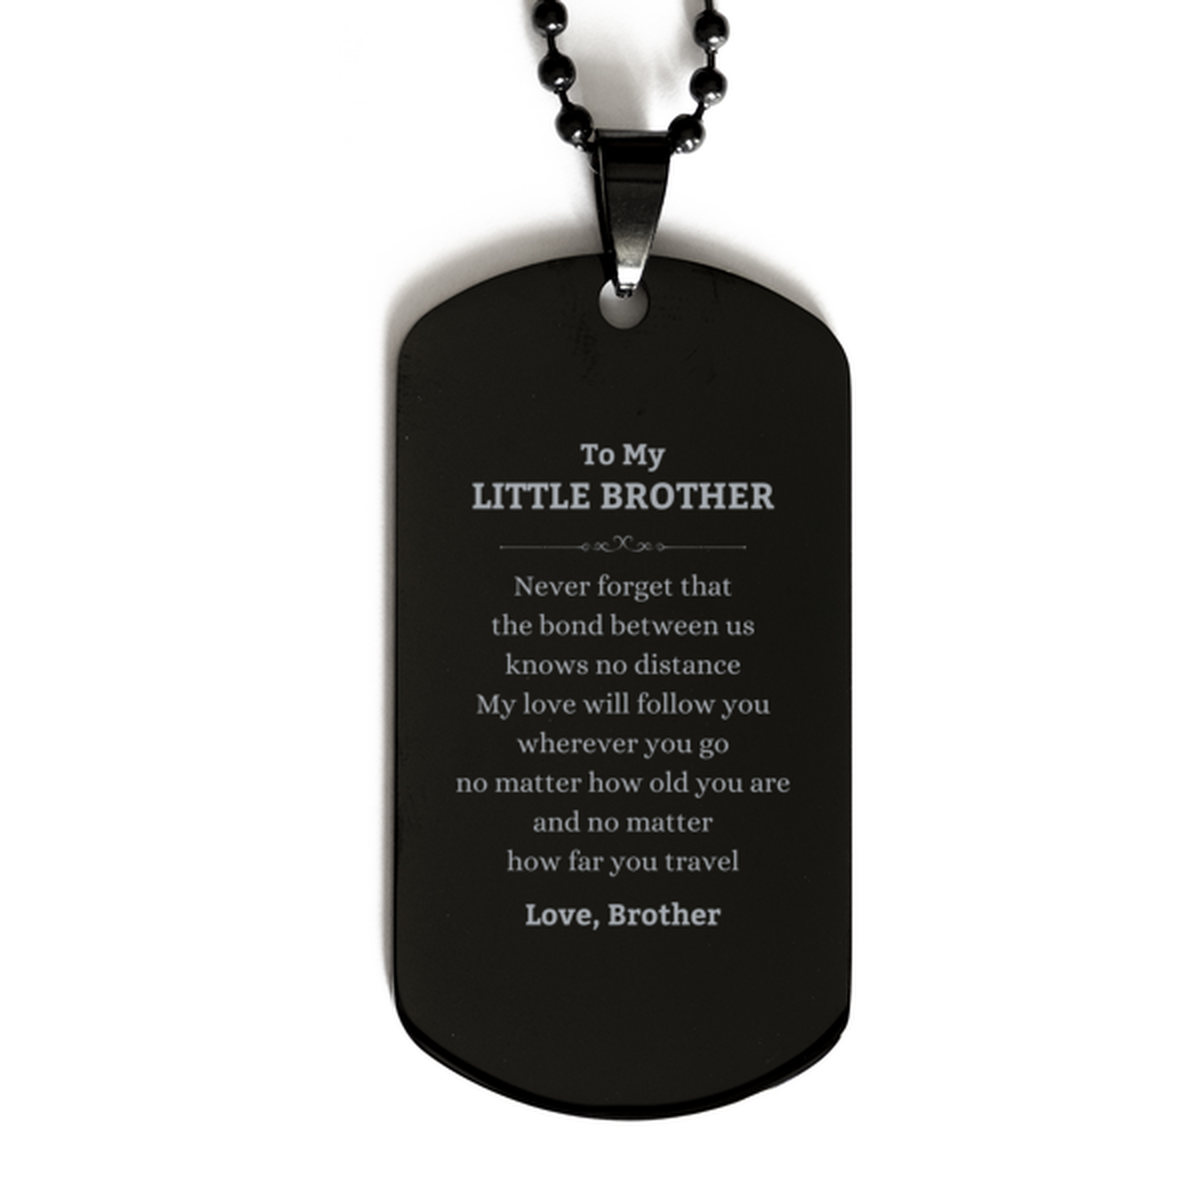 Little Brother Birthday Gifts from Brother, Adjustable Black Dog Tag for Little Brother Christmas Graduation Unique Gifts Little Brother Never forget that the bond between us knows no distance. Love, Brother